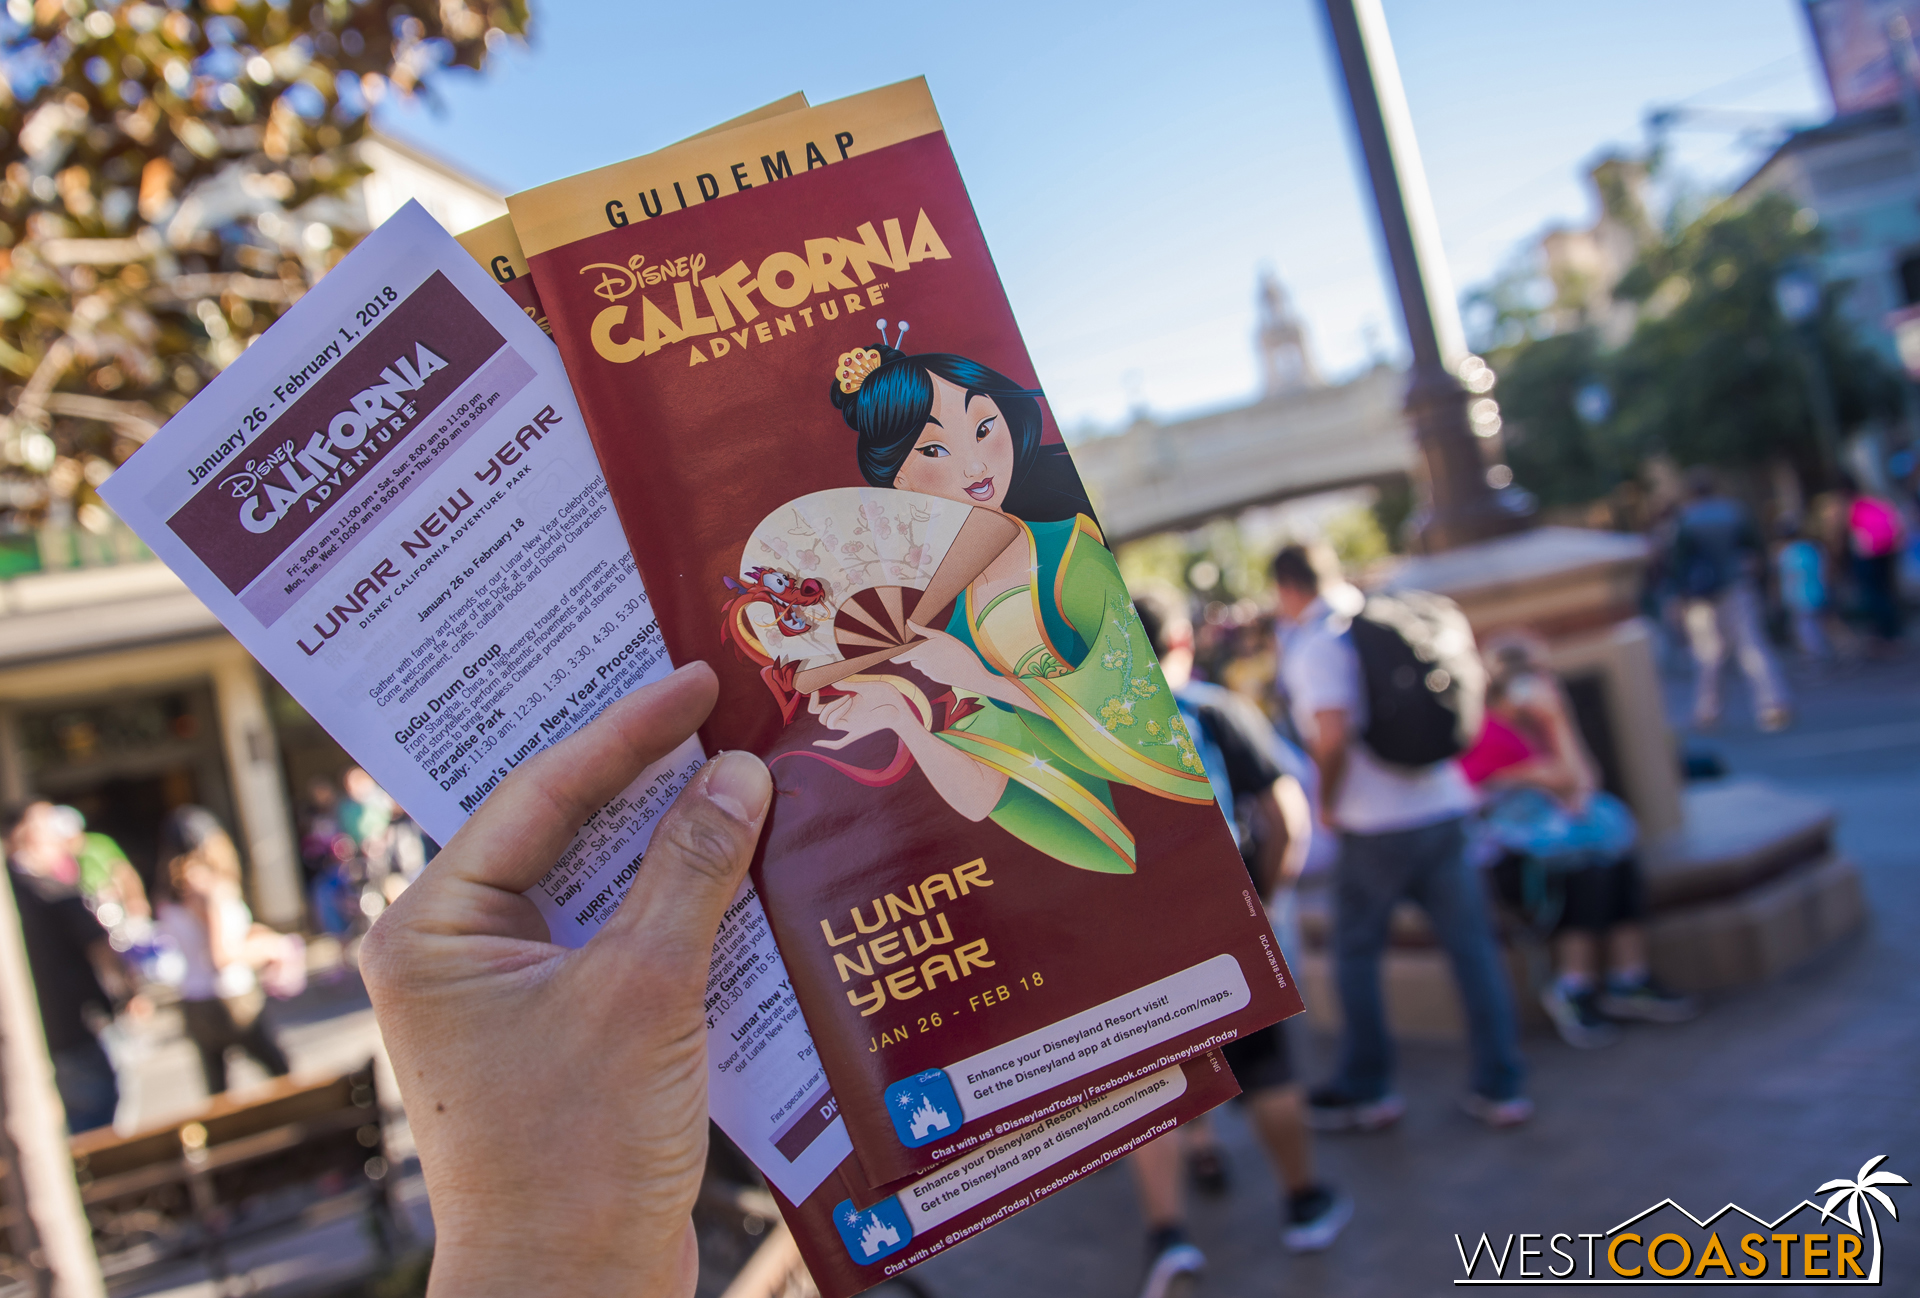  There's an entertainment guide, and Mulan is actually on the park map this year.&nbsp; Last year, they had Elsa, because they had to advertise the  Frozen  show at the Hyperion Theater. 